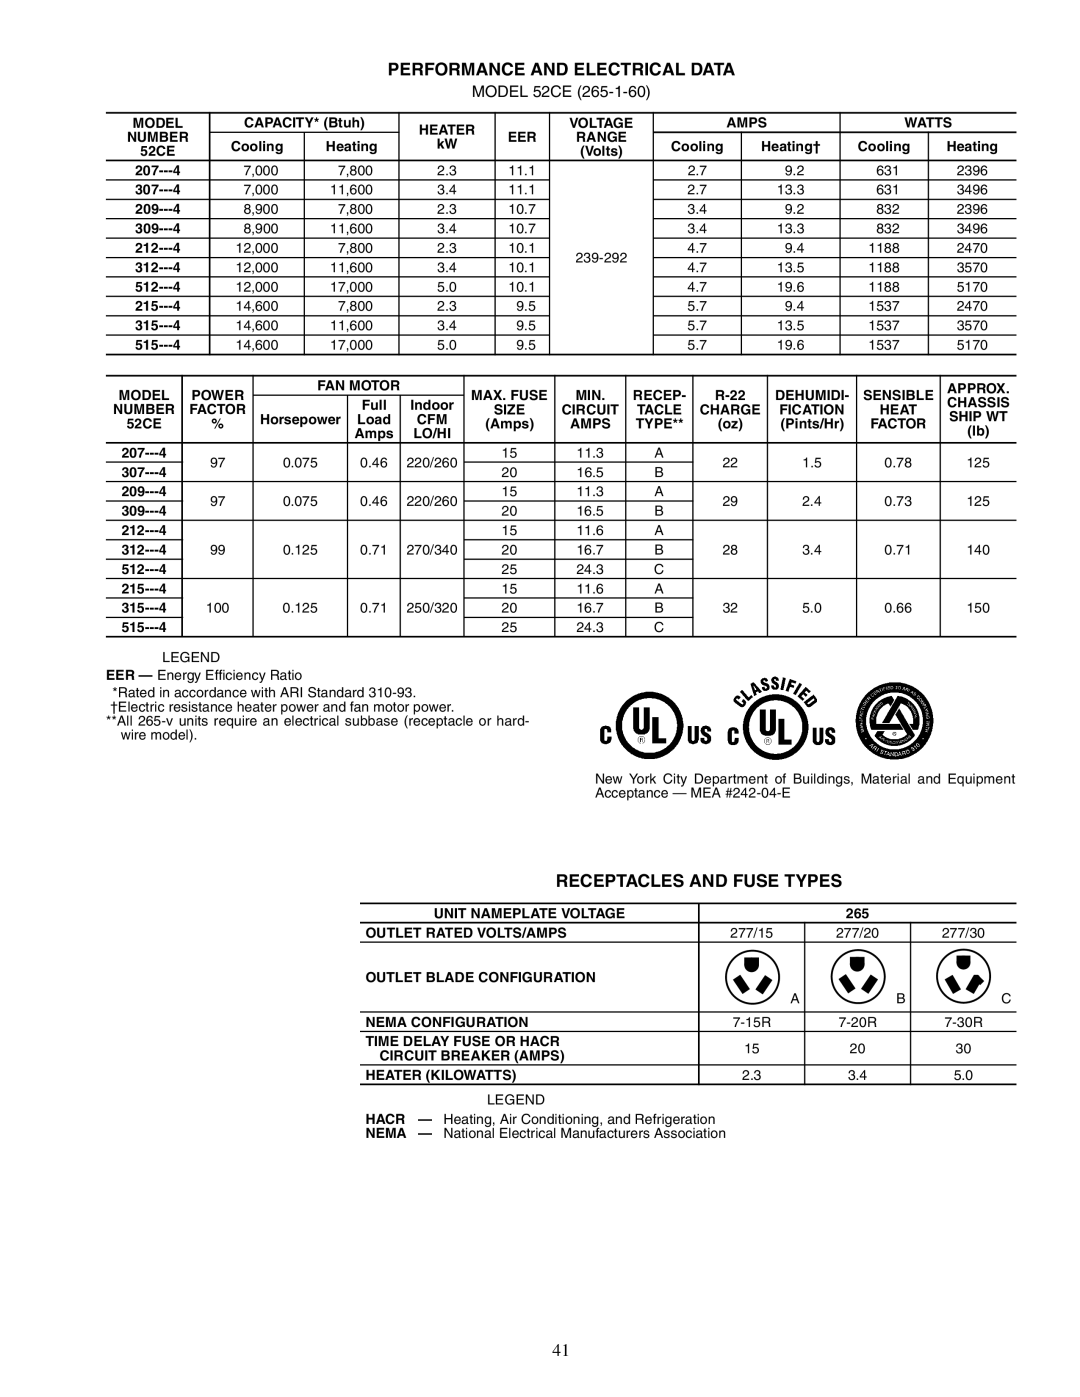 Carrier 592-085 warranty Performance And Electrical Data, Receptacles And Fuse Types, MODEL 52CE 